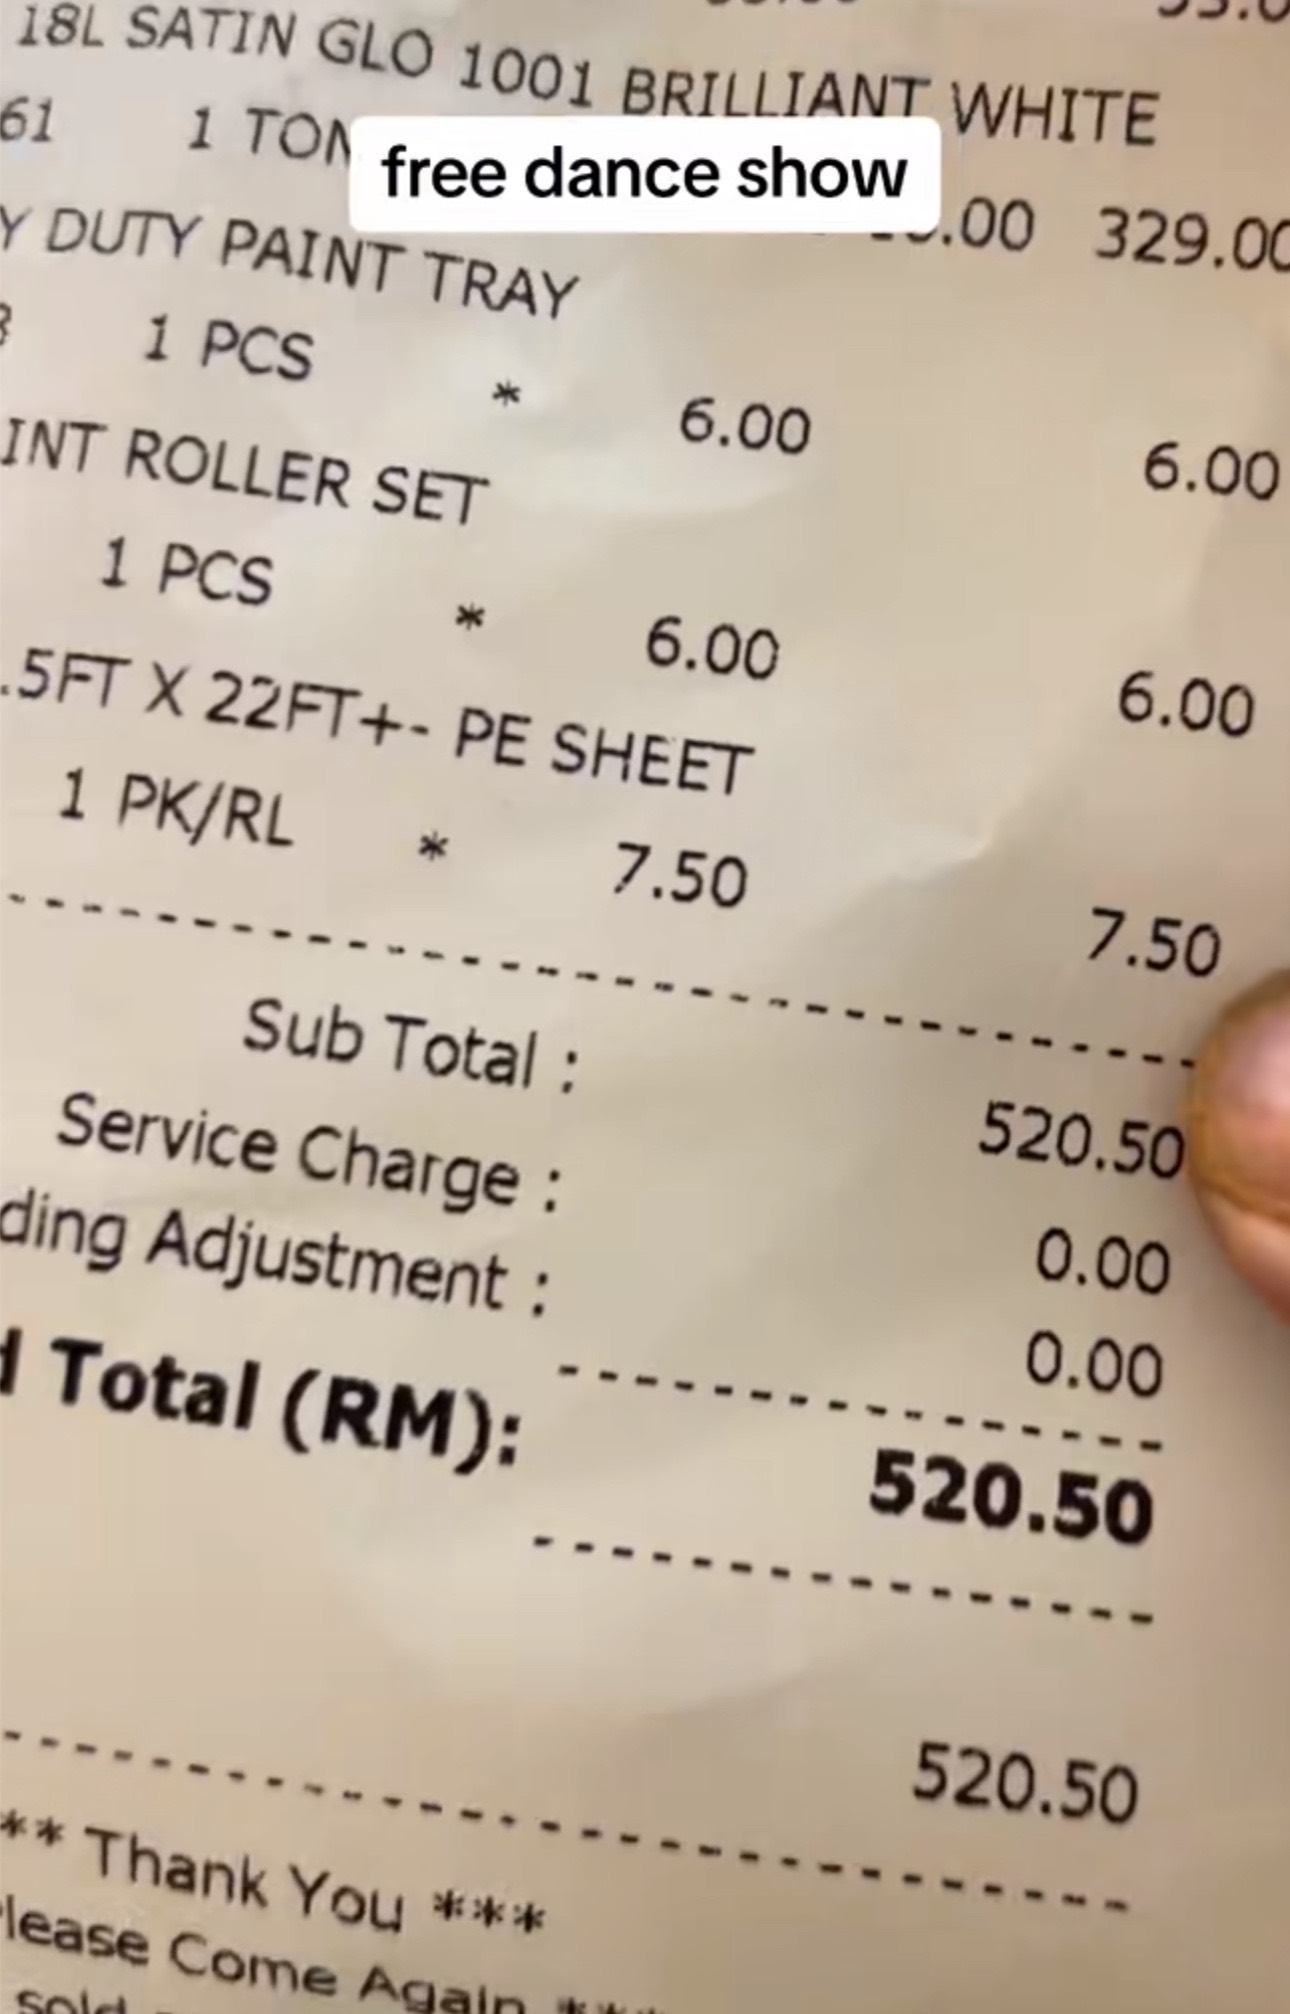 Receipt after purchasing paint items totaling rm520. 50